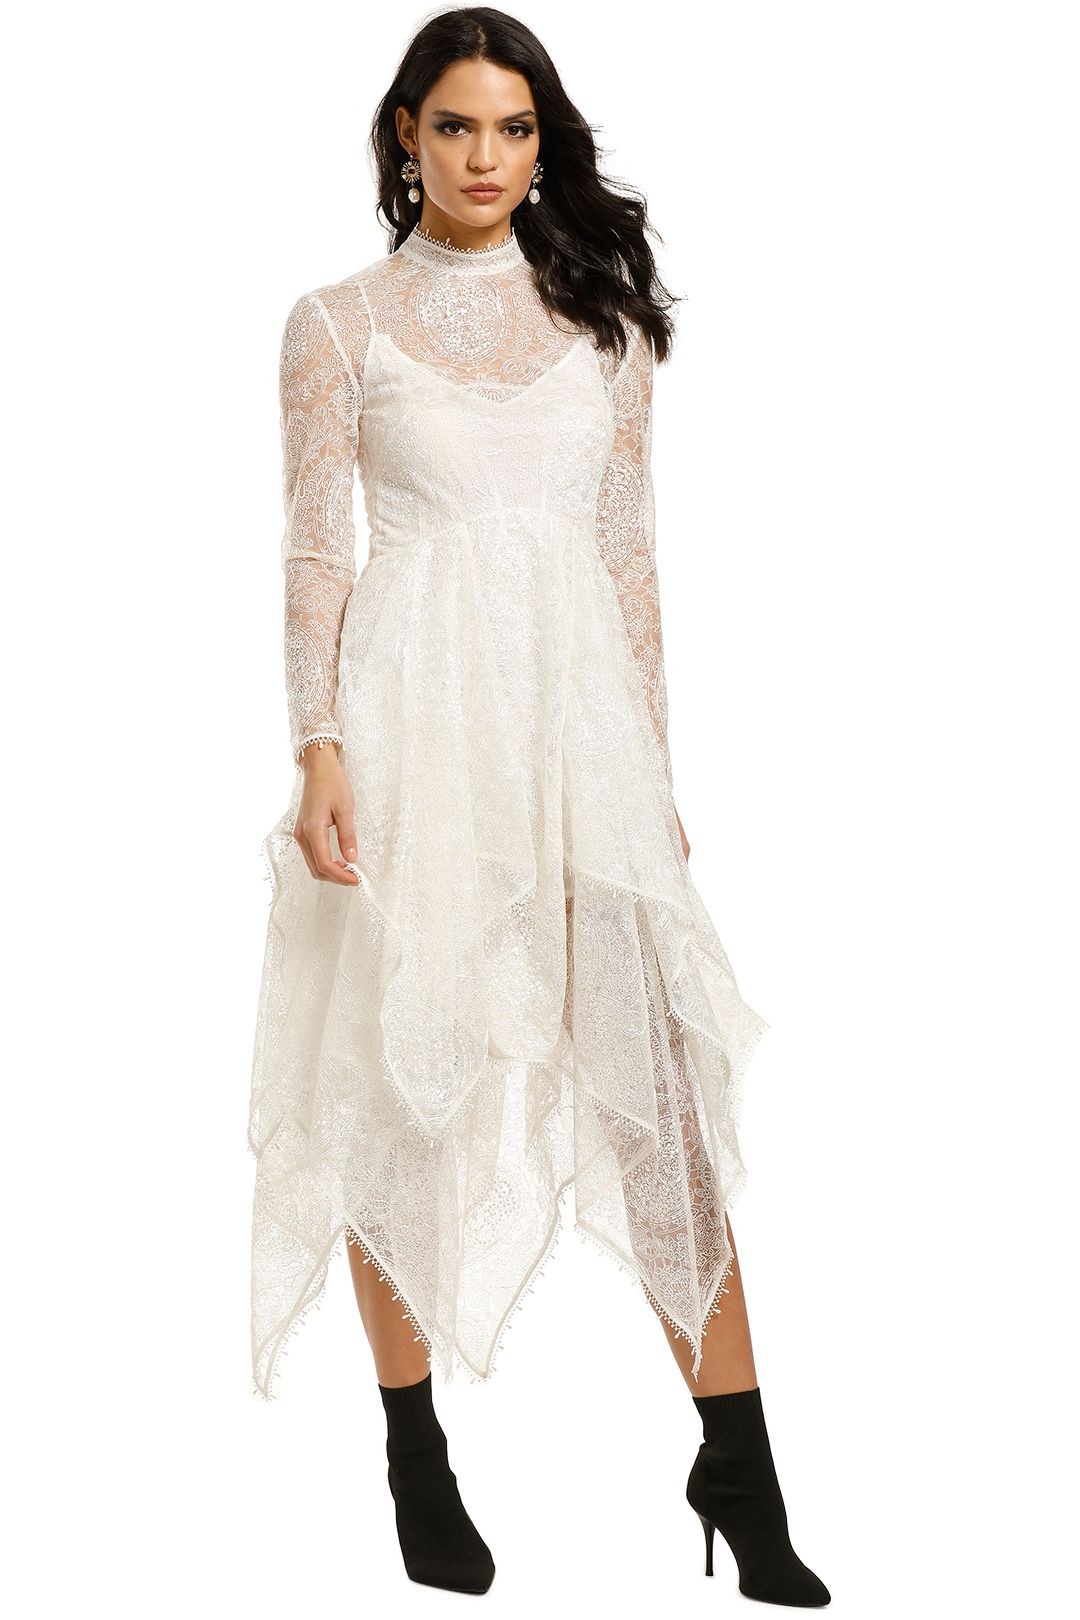 Leo-and-Lin-Serenity-Lace-Handkerchief-Dress-White-Front